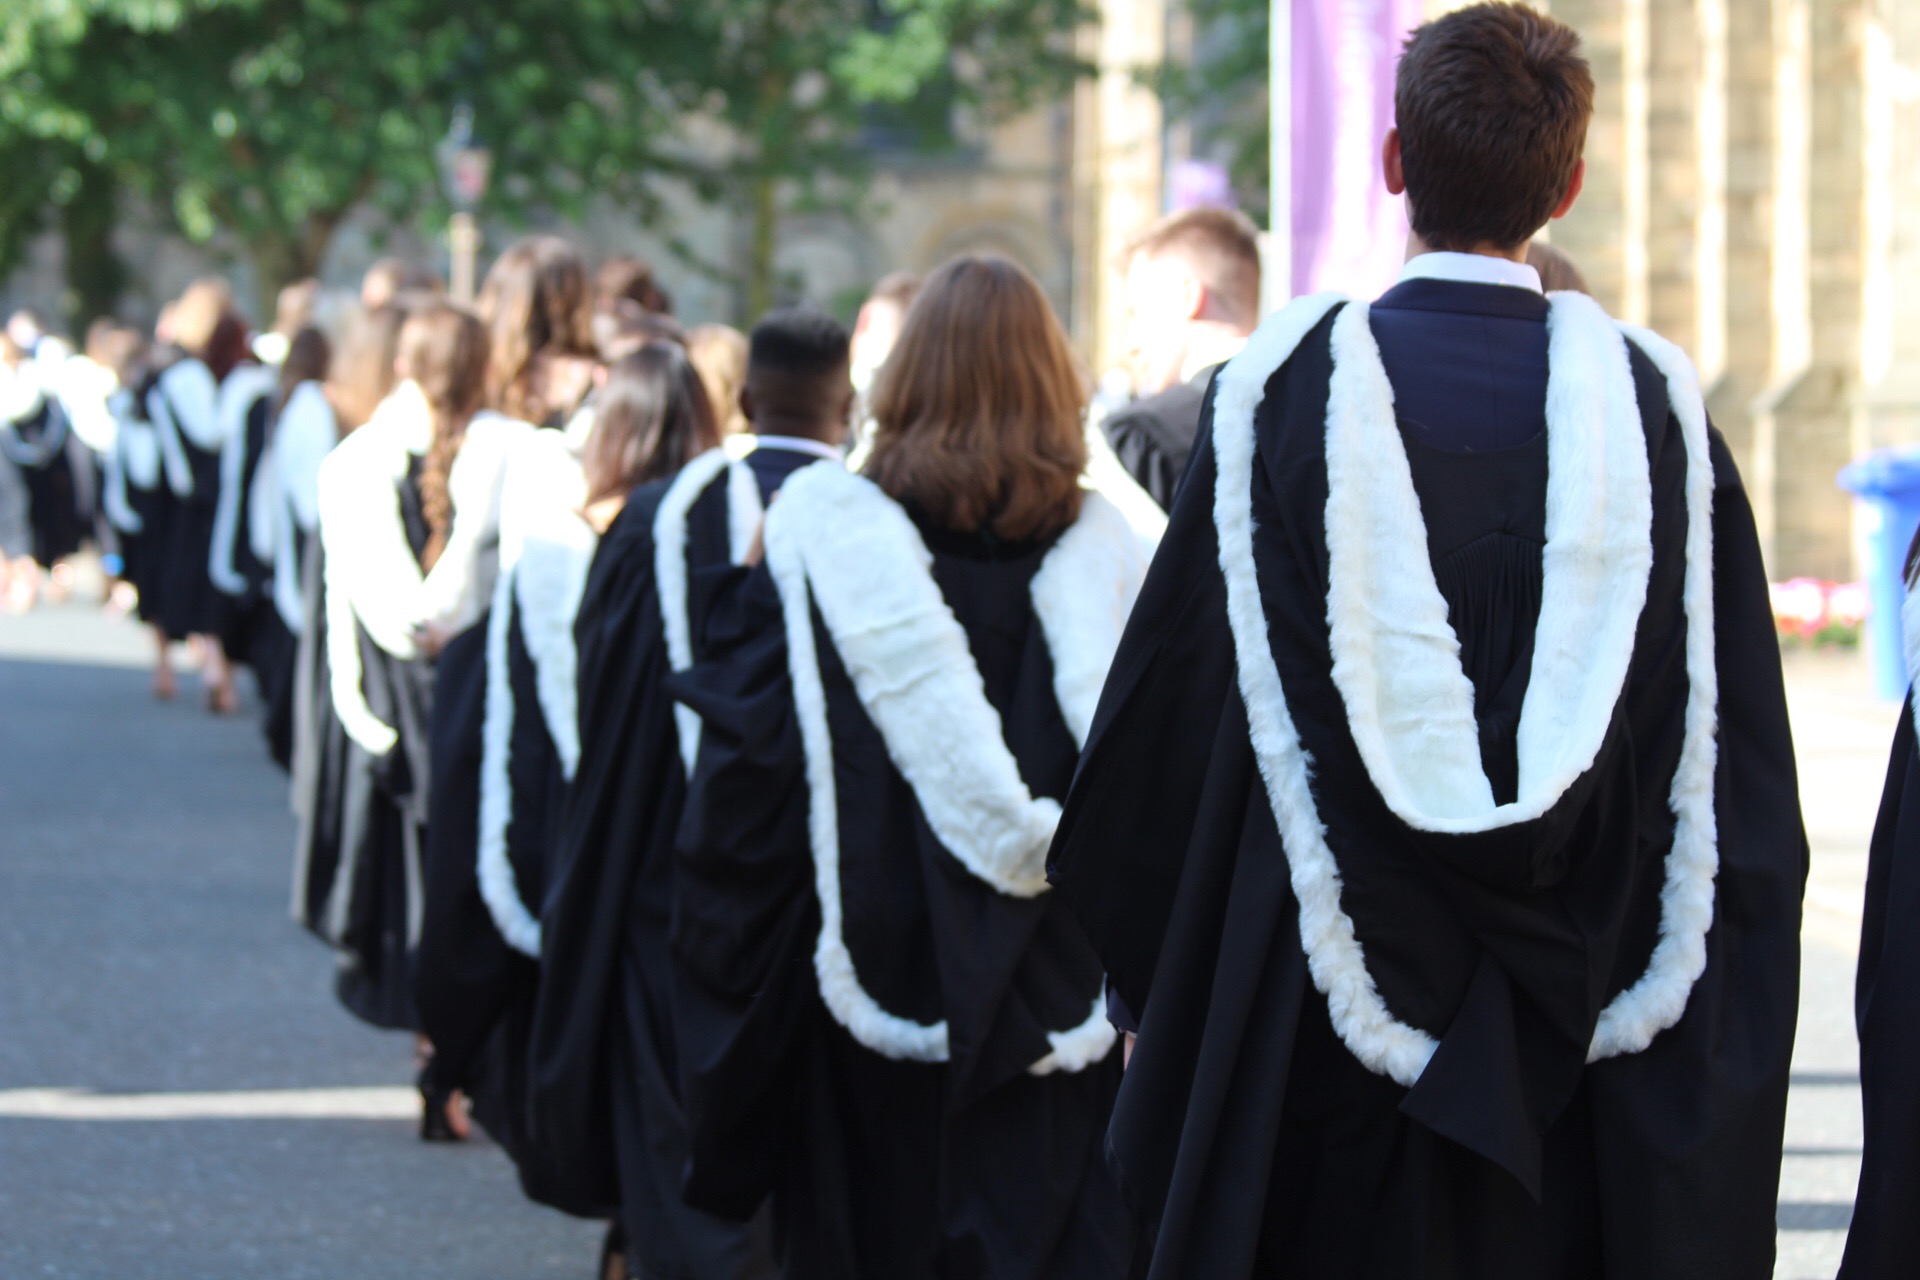 Students walking out of Durham cathedral wearing graduation robes